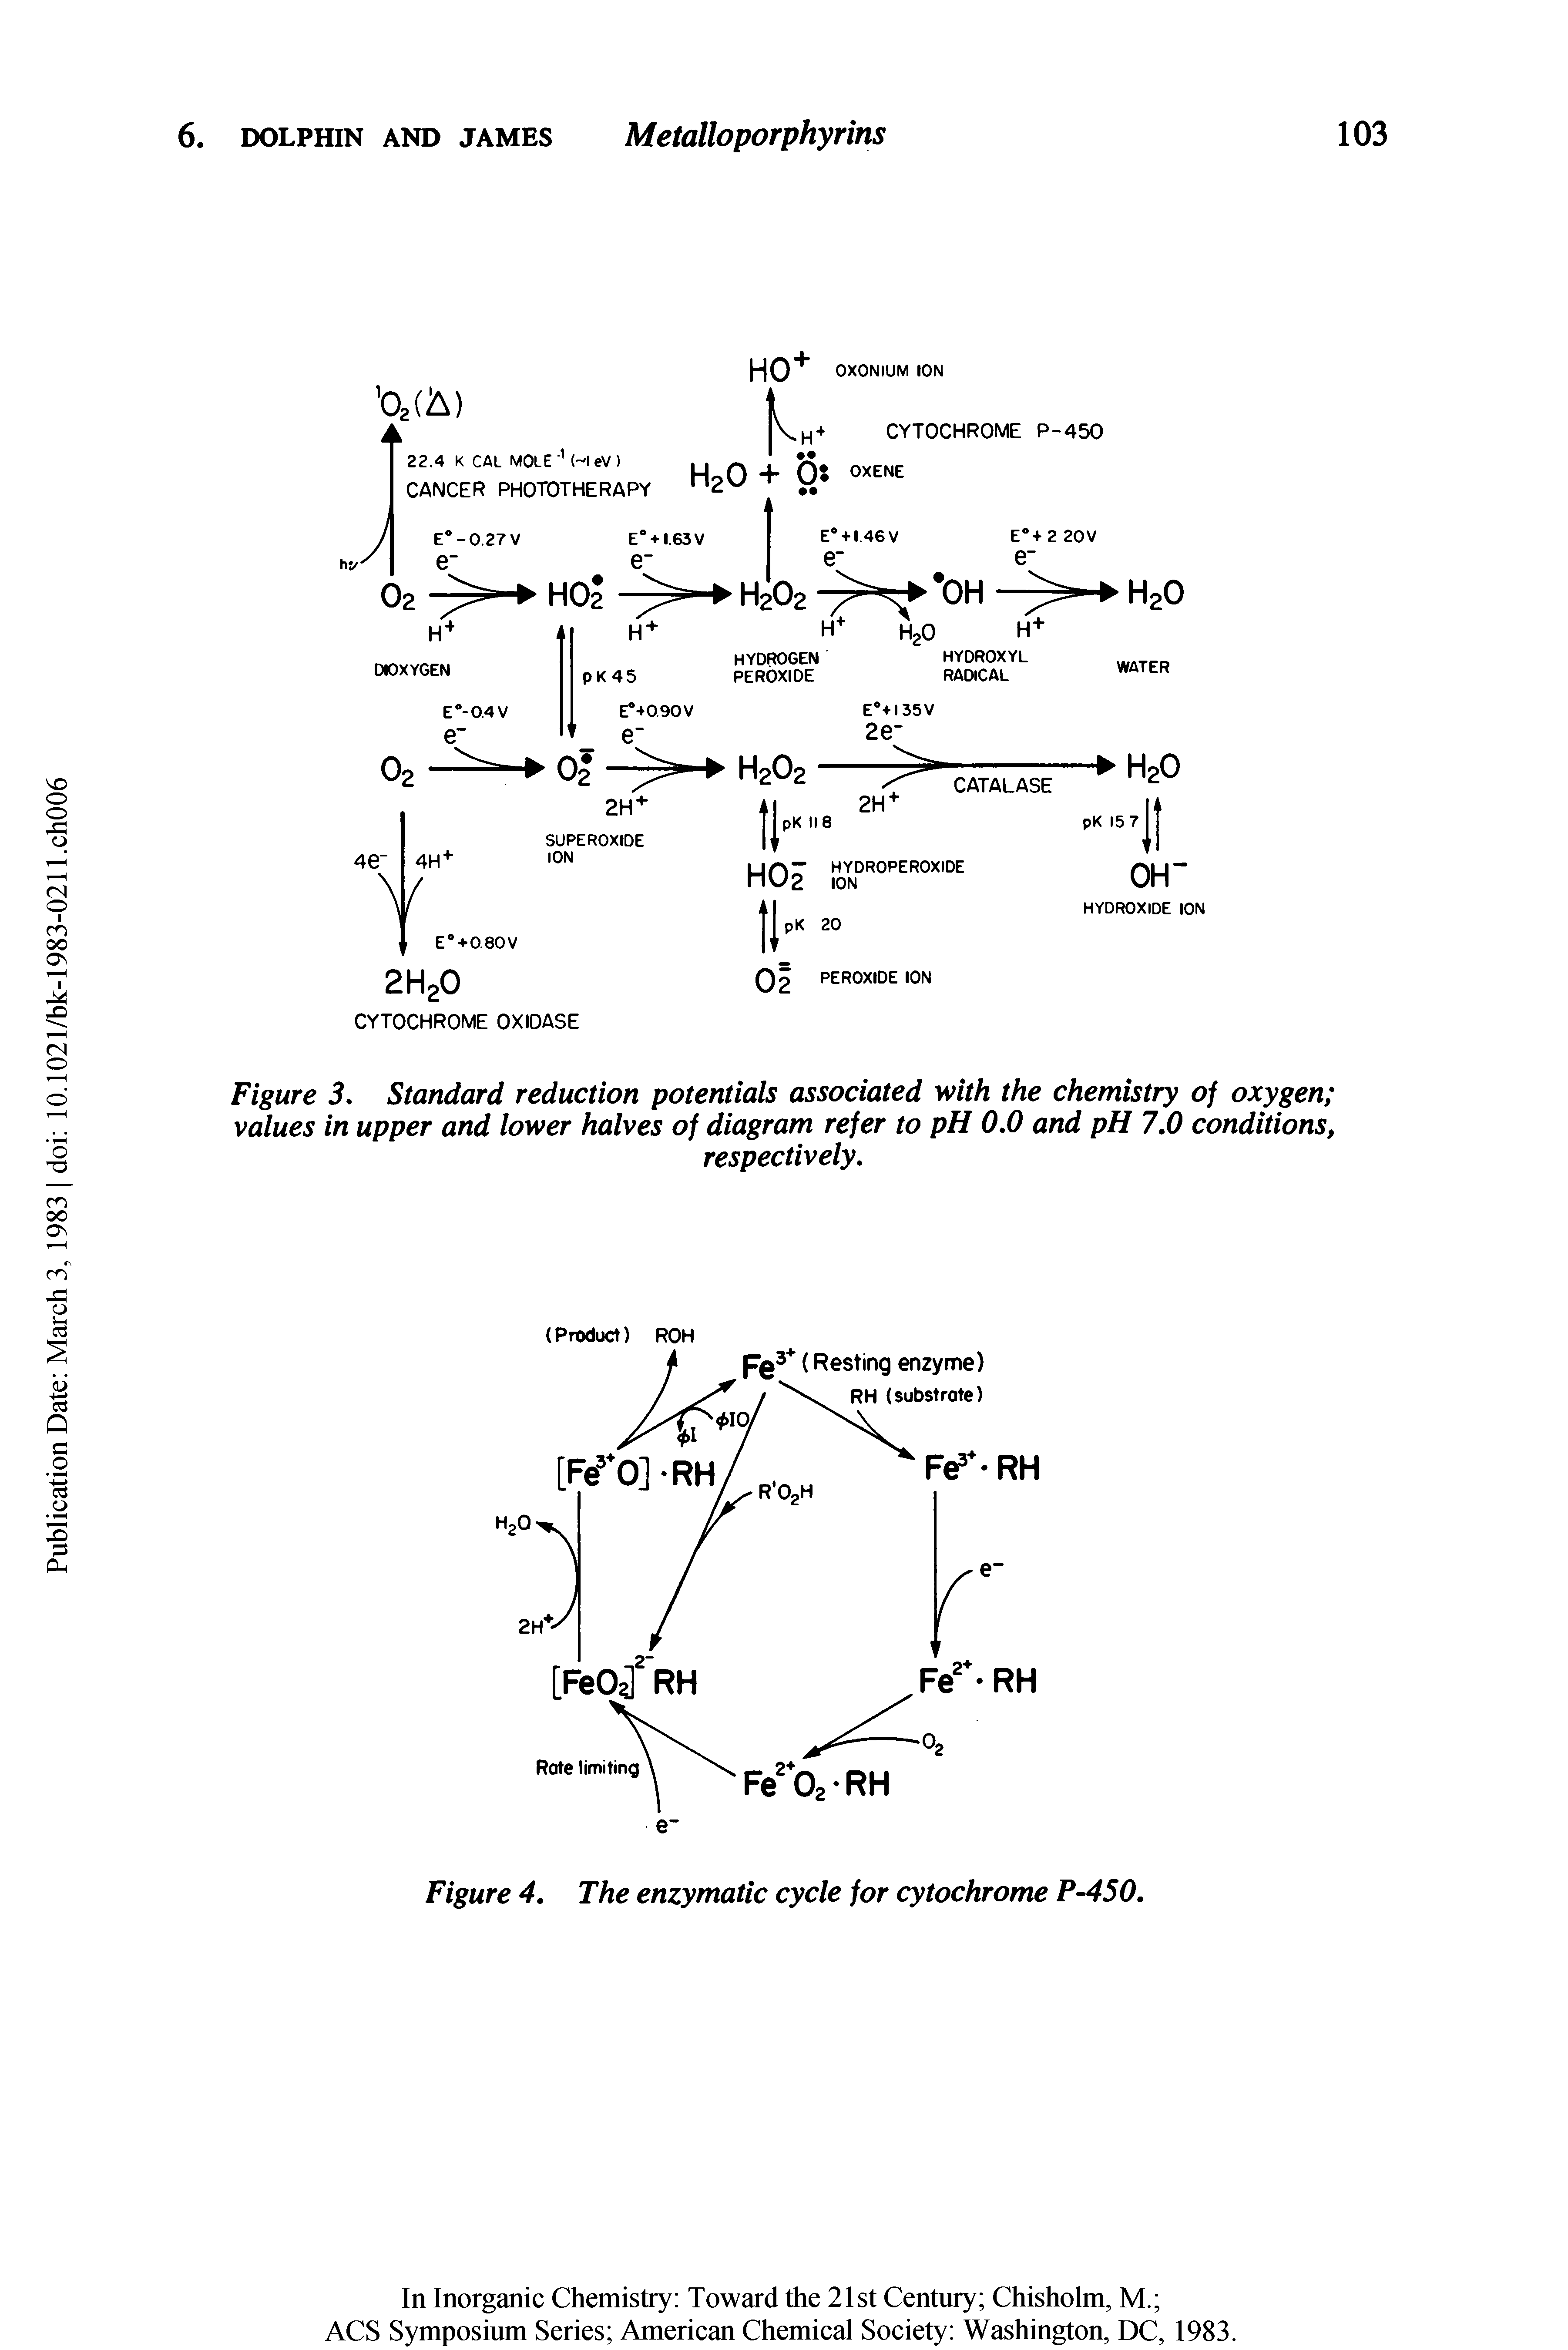 Figure 3, Standard reduction potentials associated with the chemistry of oxygen values in upper and lower halves of diagram refer to pH 0,0 and pH 7,0 conditions,...